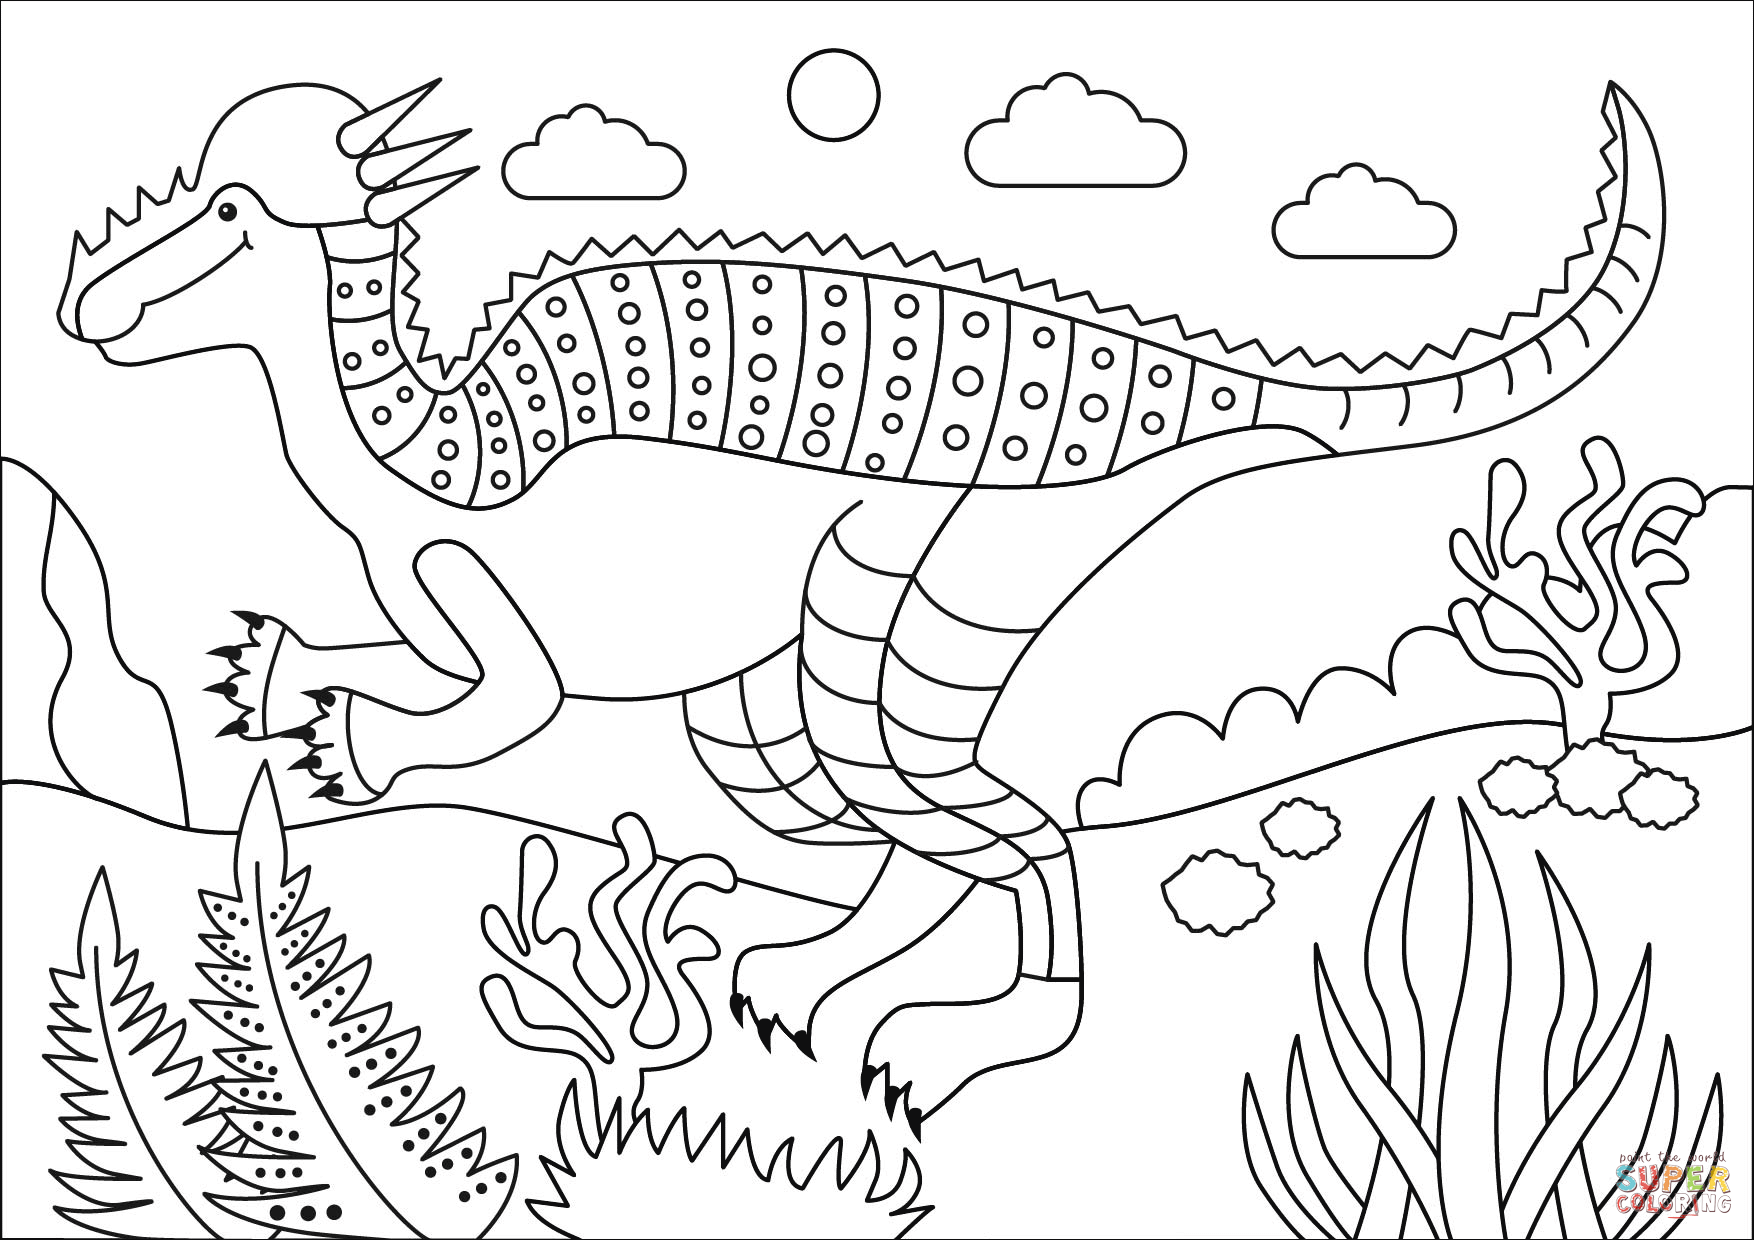 Pachycephalosaurus coloring page | Free Printable Coloring Pages